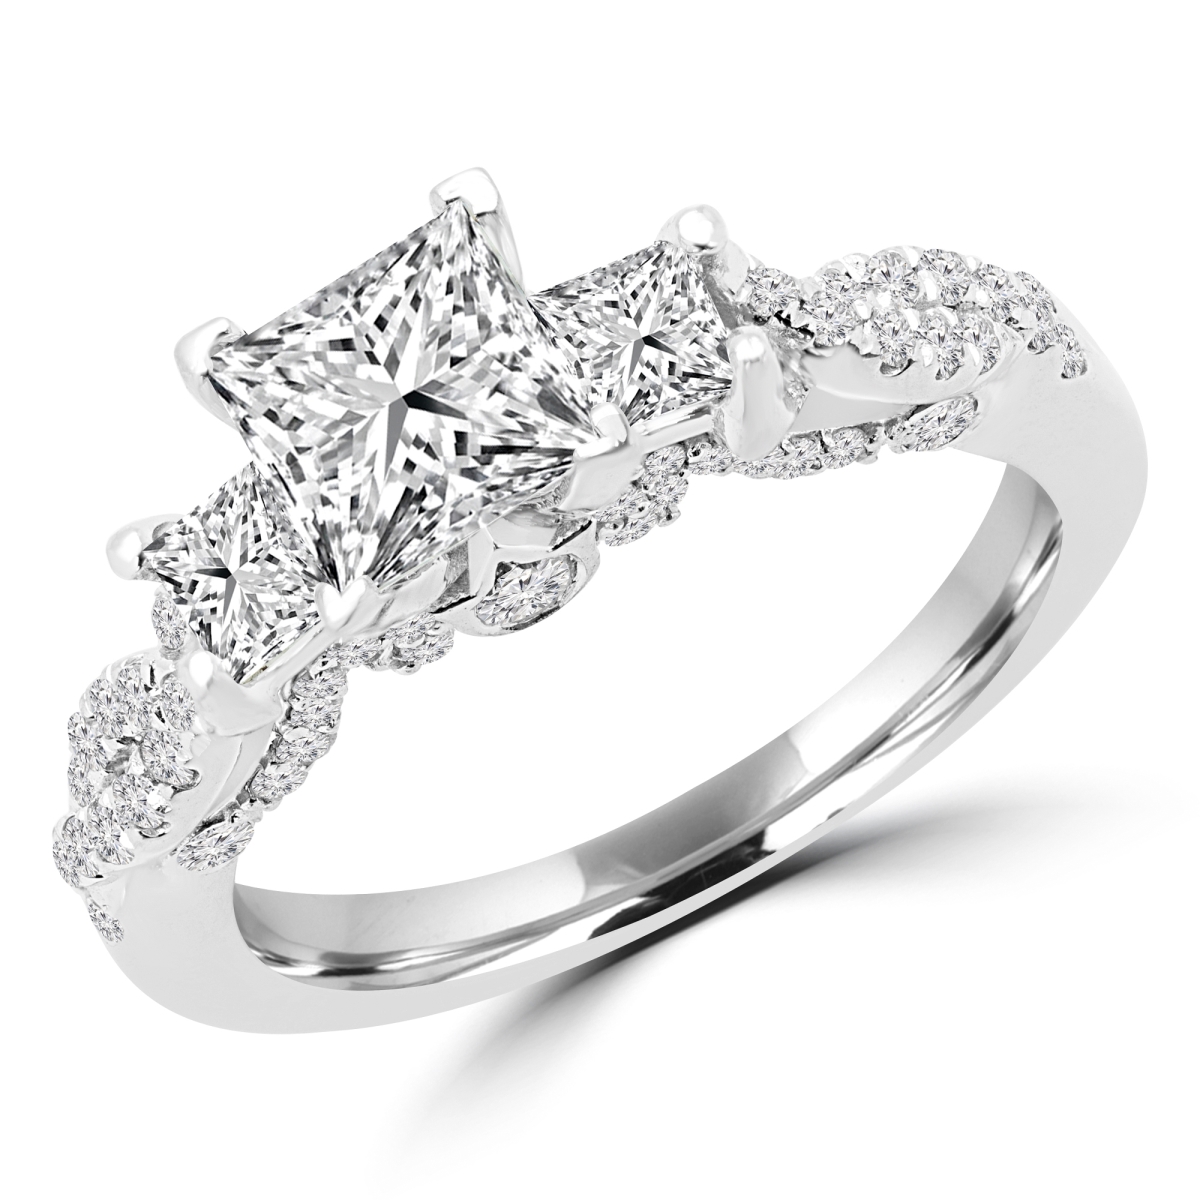 Picture of Majesty Diamonds MD180069-P 1.75 CTW Princess Diamond Three-Stone Engagement Ring in 14K White Gold